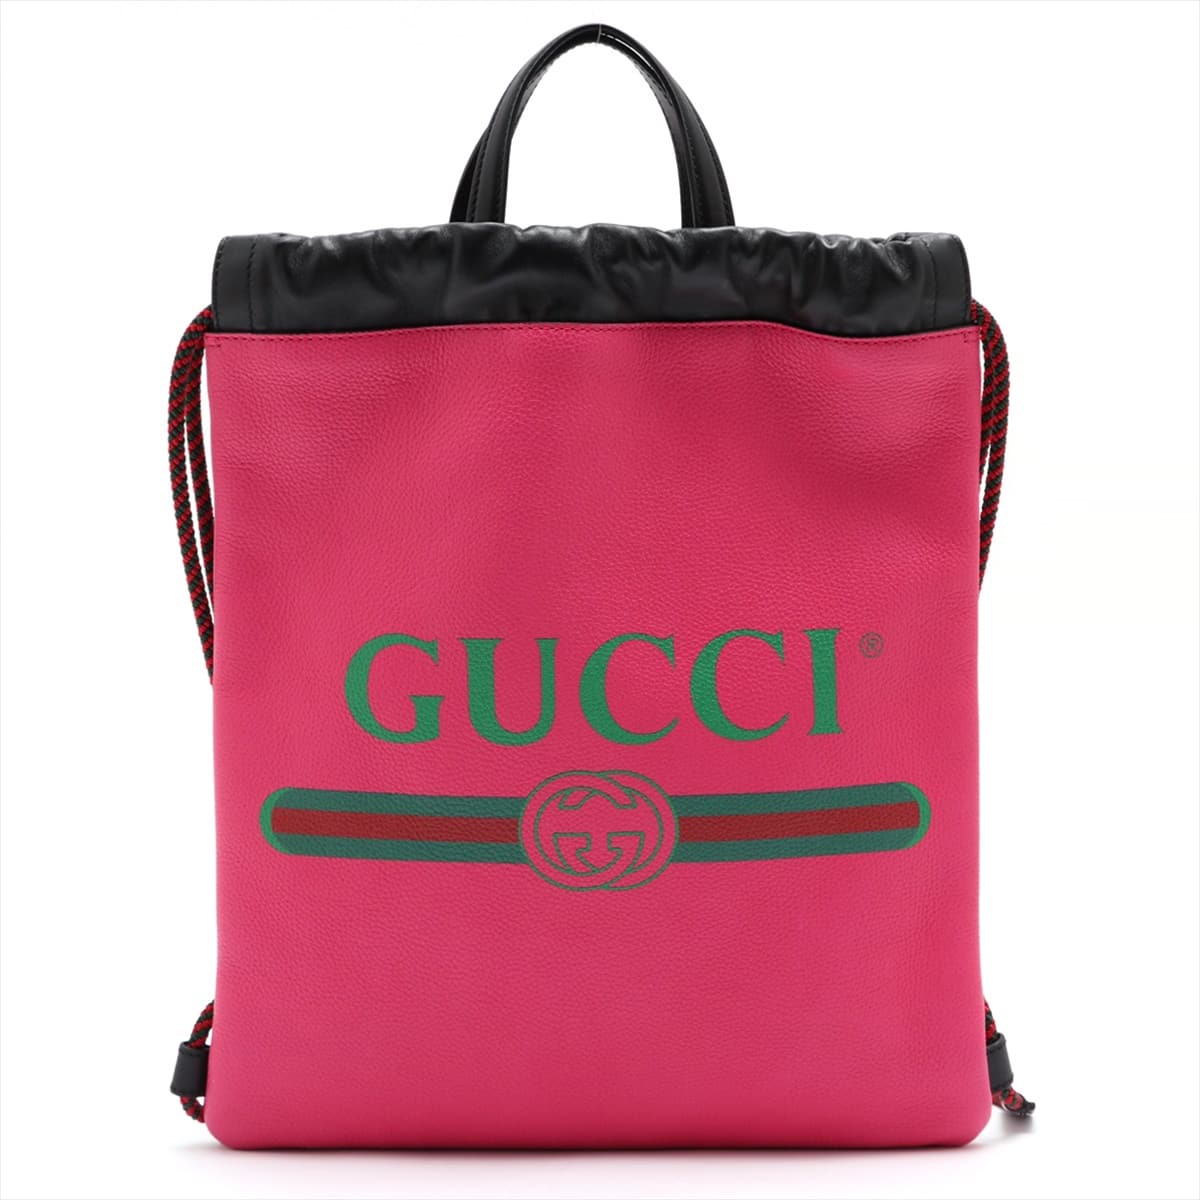 Gucci Logo Print Leather Backpack Pink 523586